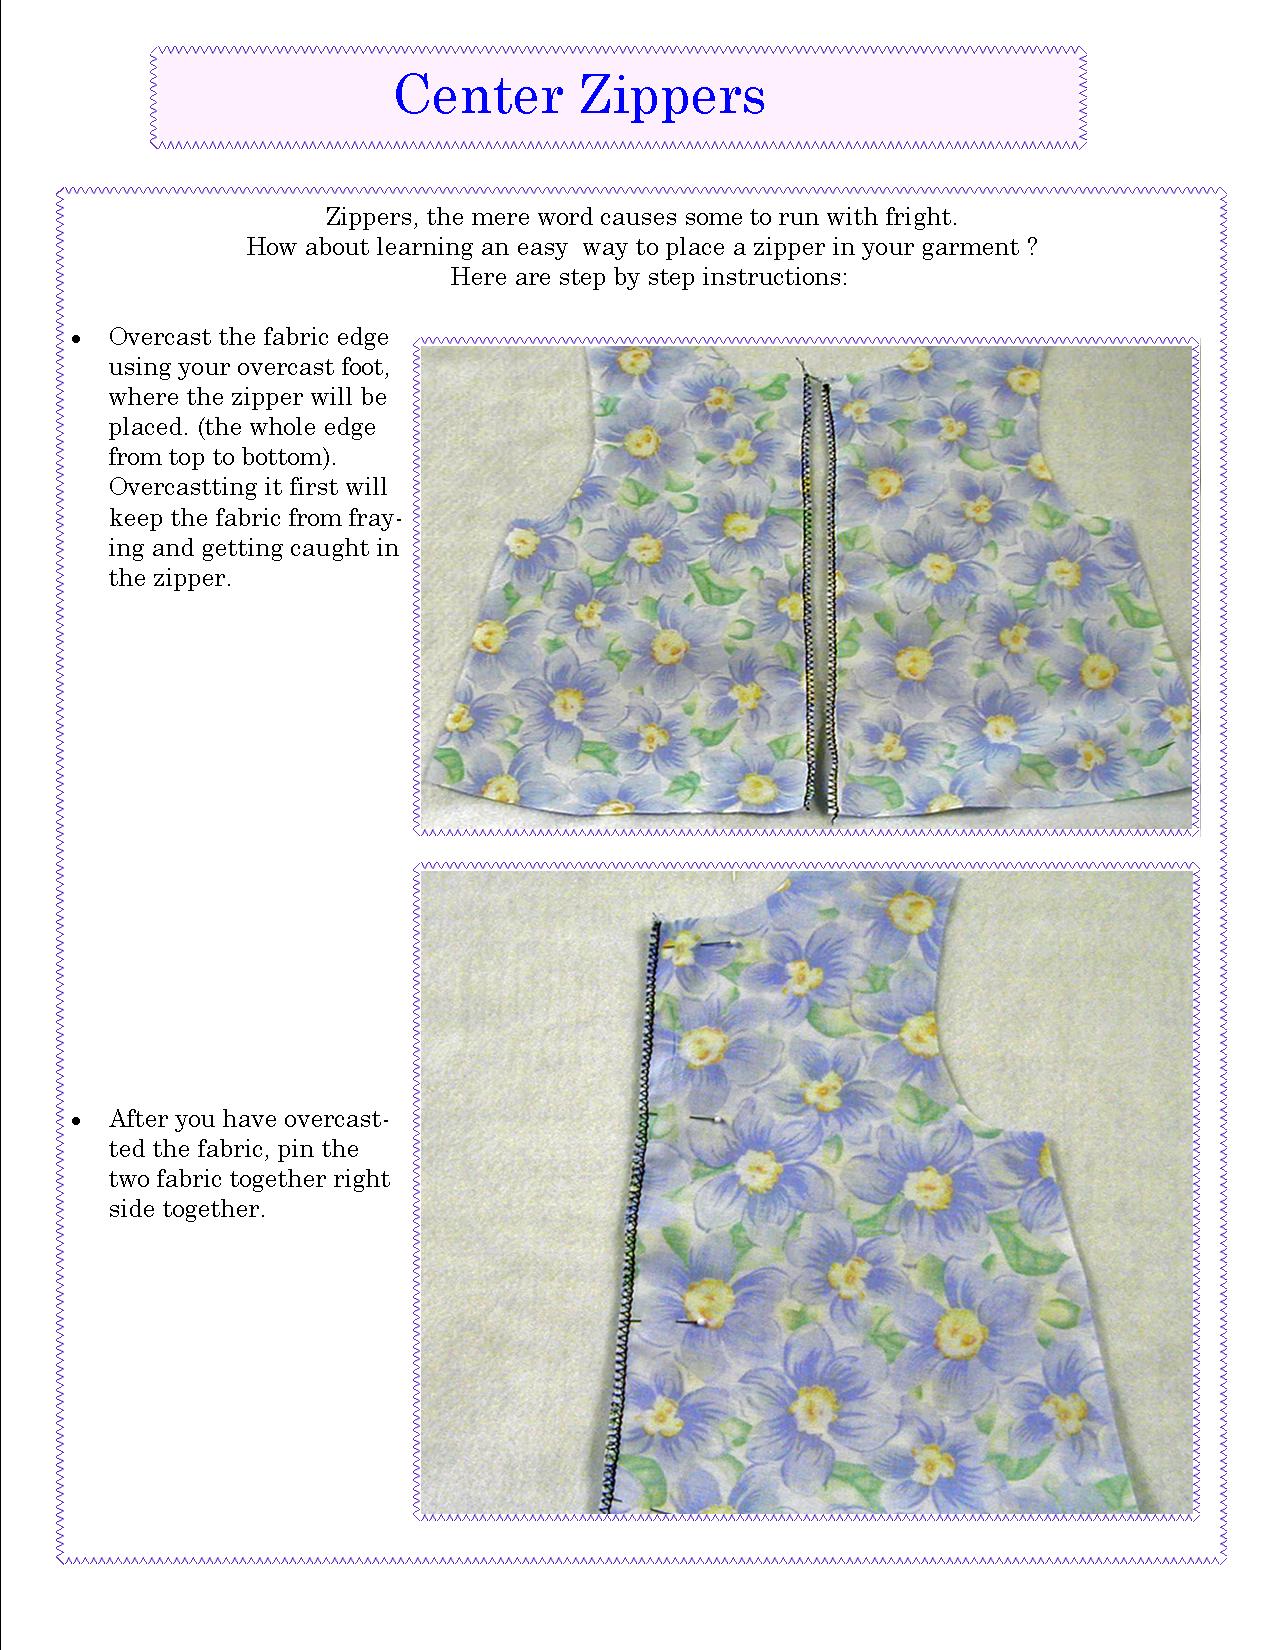 How to put in a Zipper tutorial -- Learn to Sew